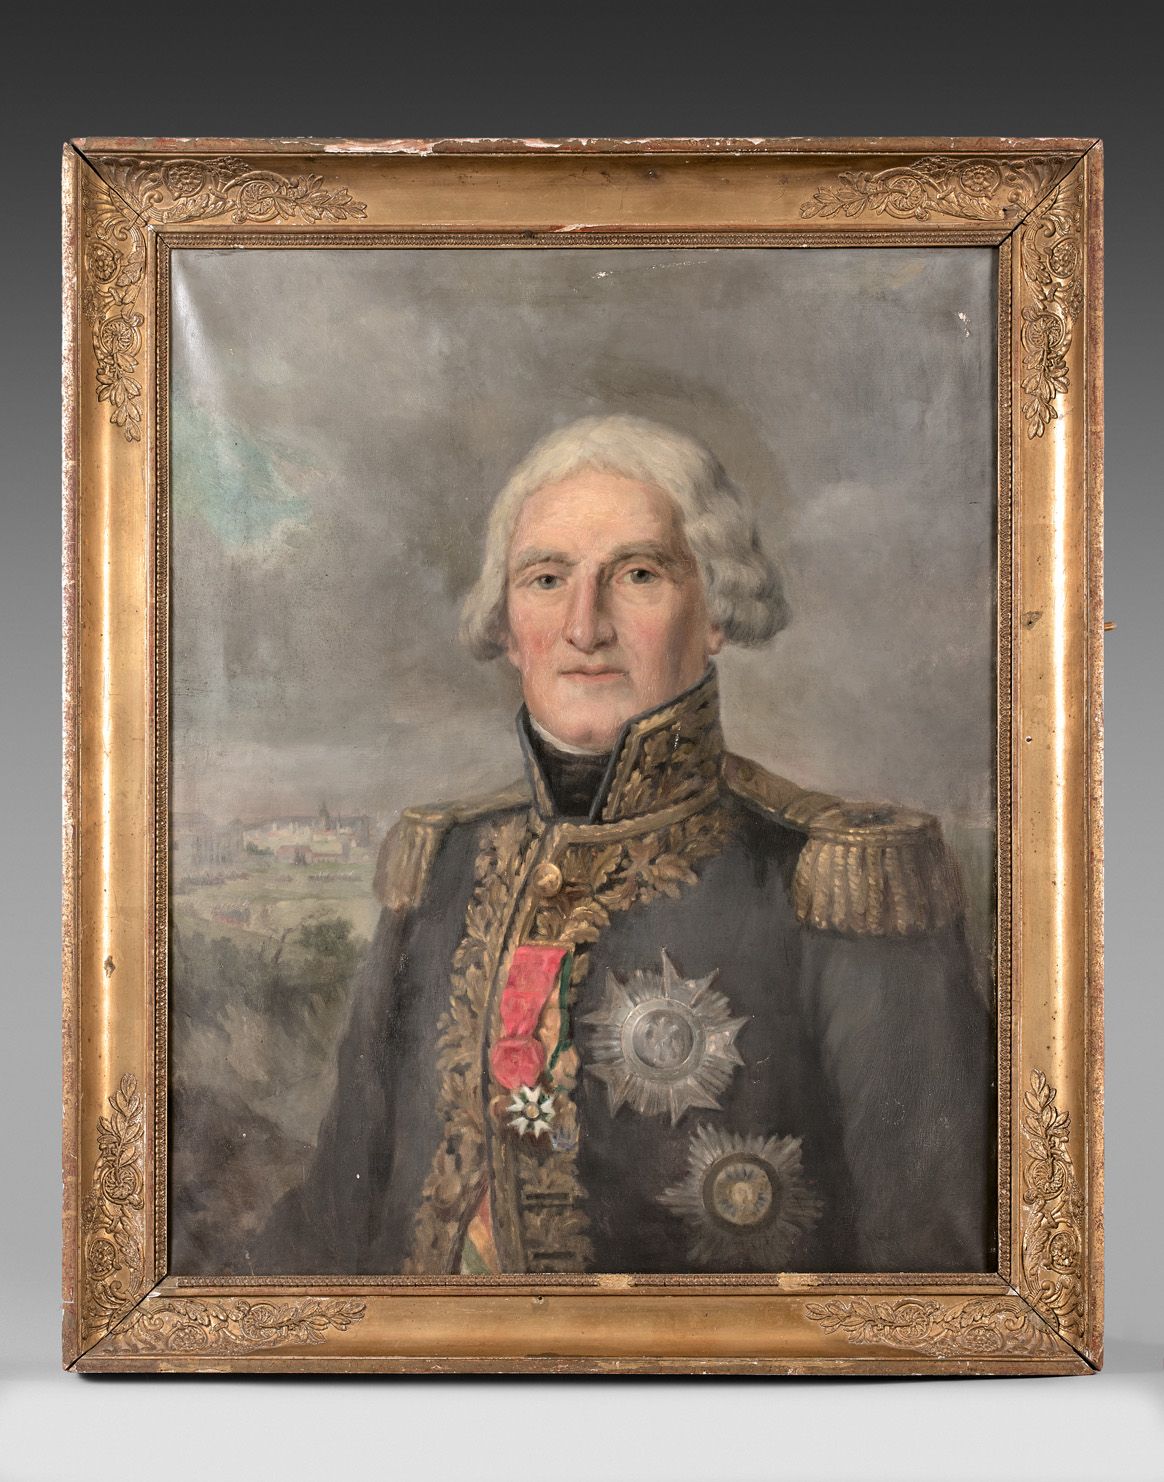 Null French school of the 19th century

Presumed portrait of General Officer Cla&hellip;